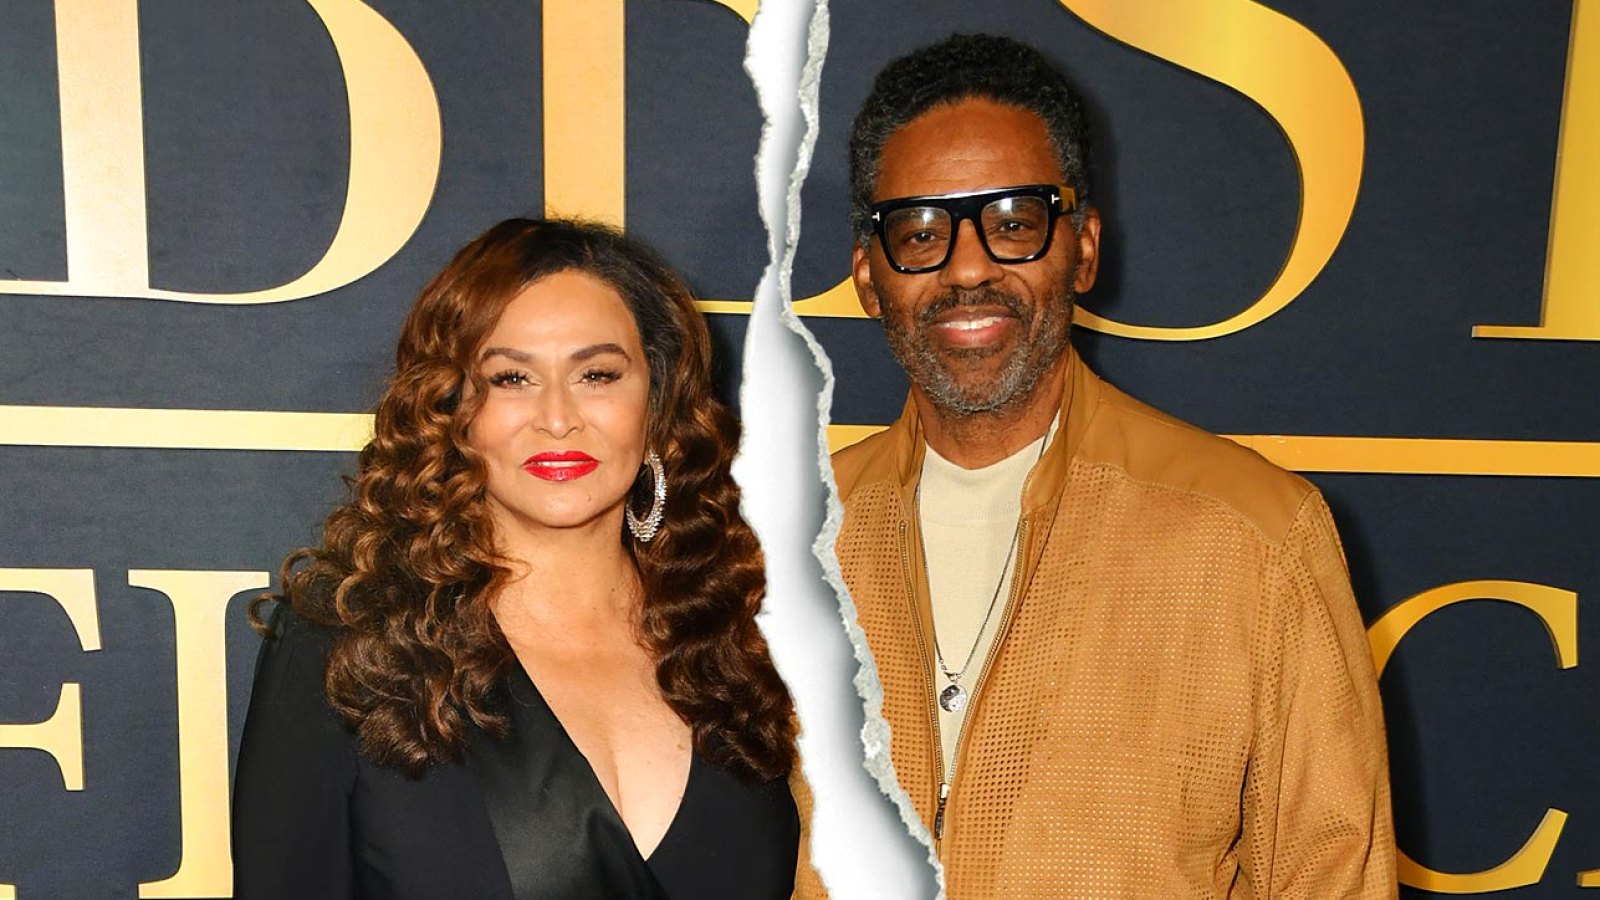 Tina Knowles Files for Divorce From Husband Richard Lawson After 8 Years of Marriage